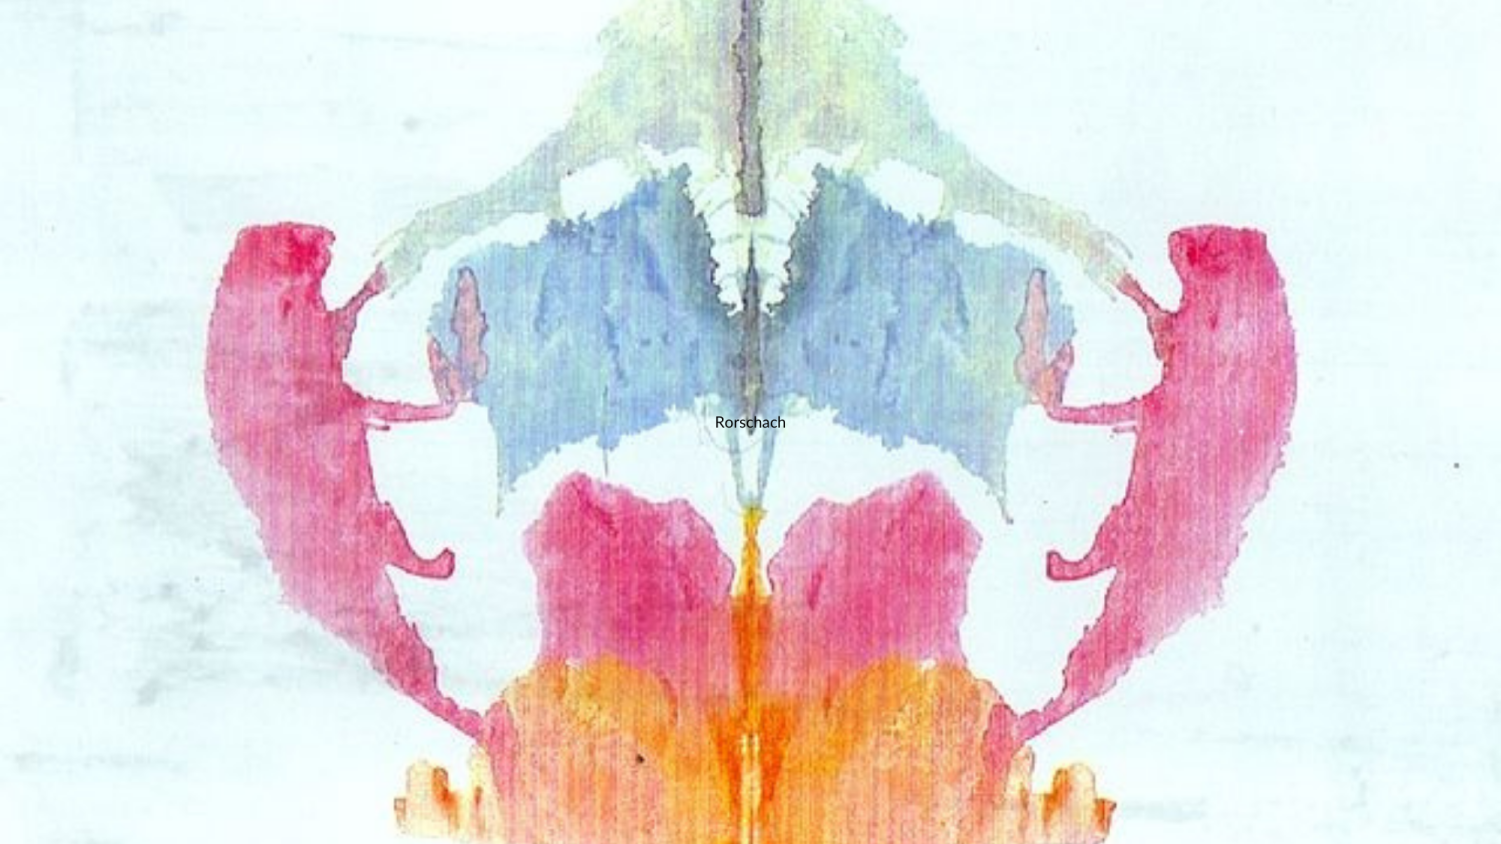 The Jewish history of the Rorschach inkblot test